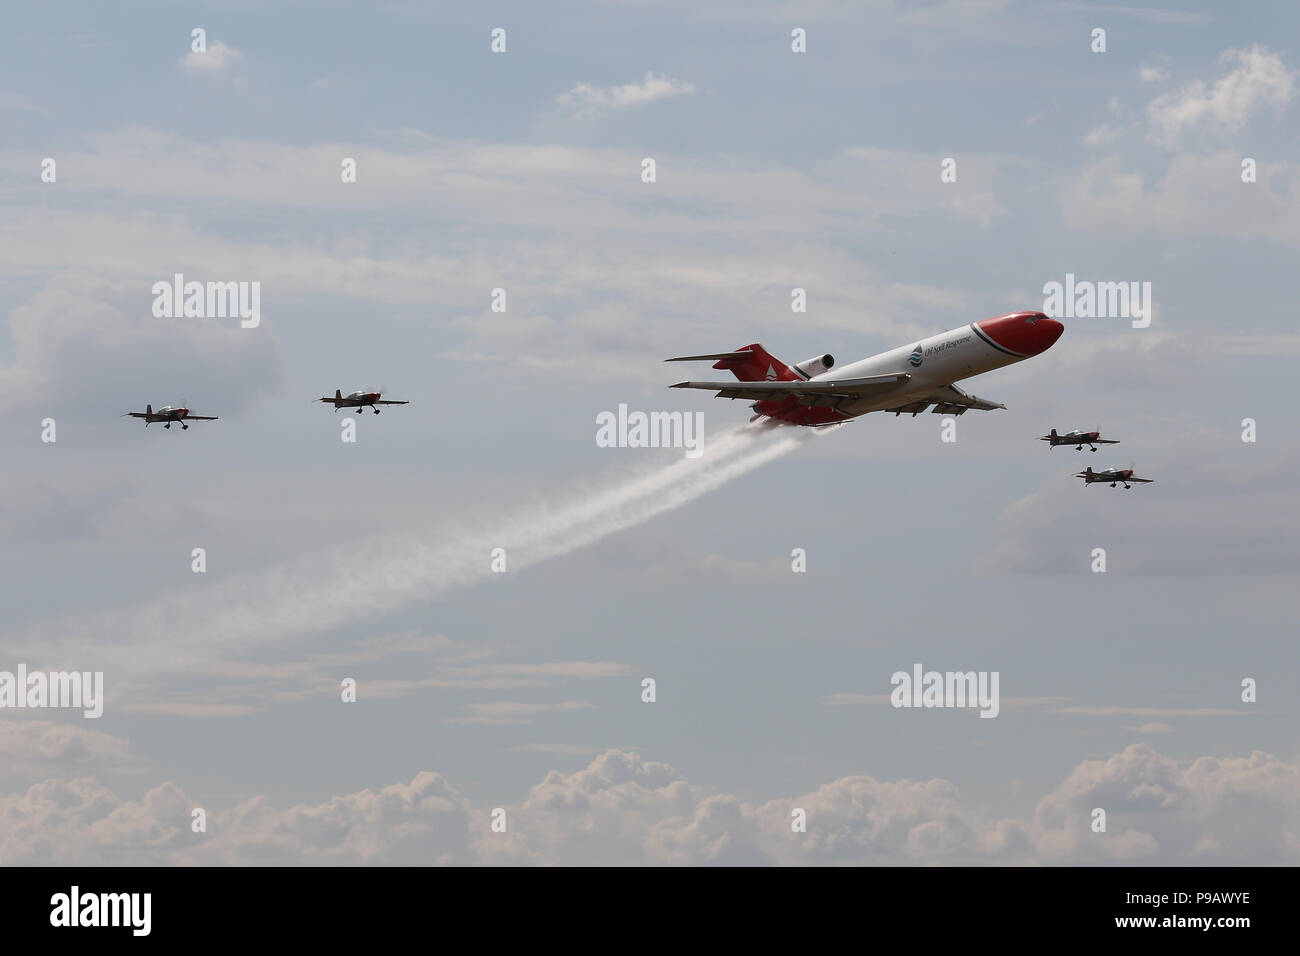 Farnborough, UK. 16th July 2018. Oil Spill Response organisation's Boeing 727 and The Blades aerobatic team perform a flypast on the opening day of the 2018 Farnborough International Airshow, one of the biggest aviation trade and industry events in the world, held in the UK. Credit: James Hancock/Alamy Live News Stock Photo